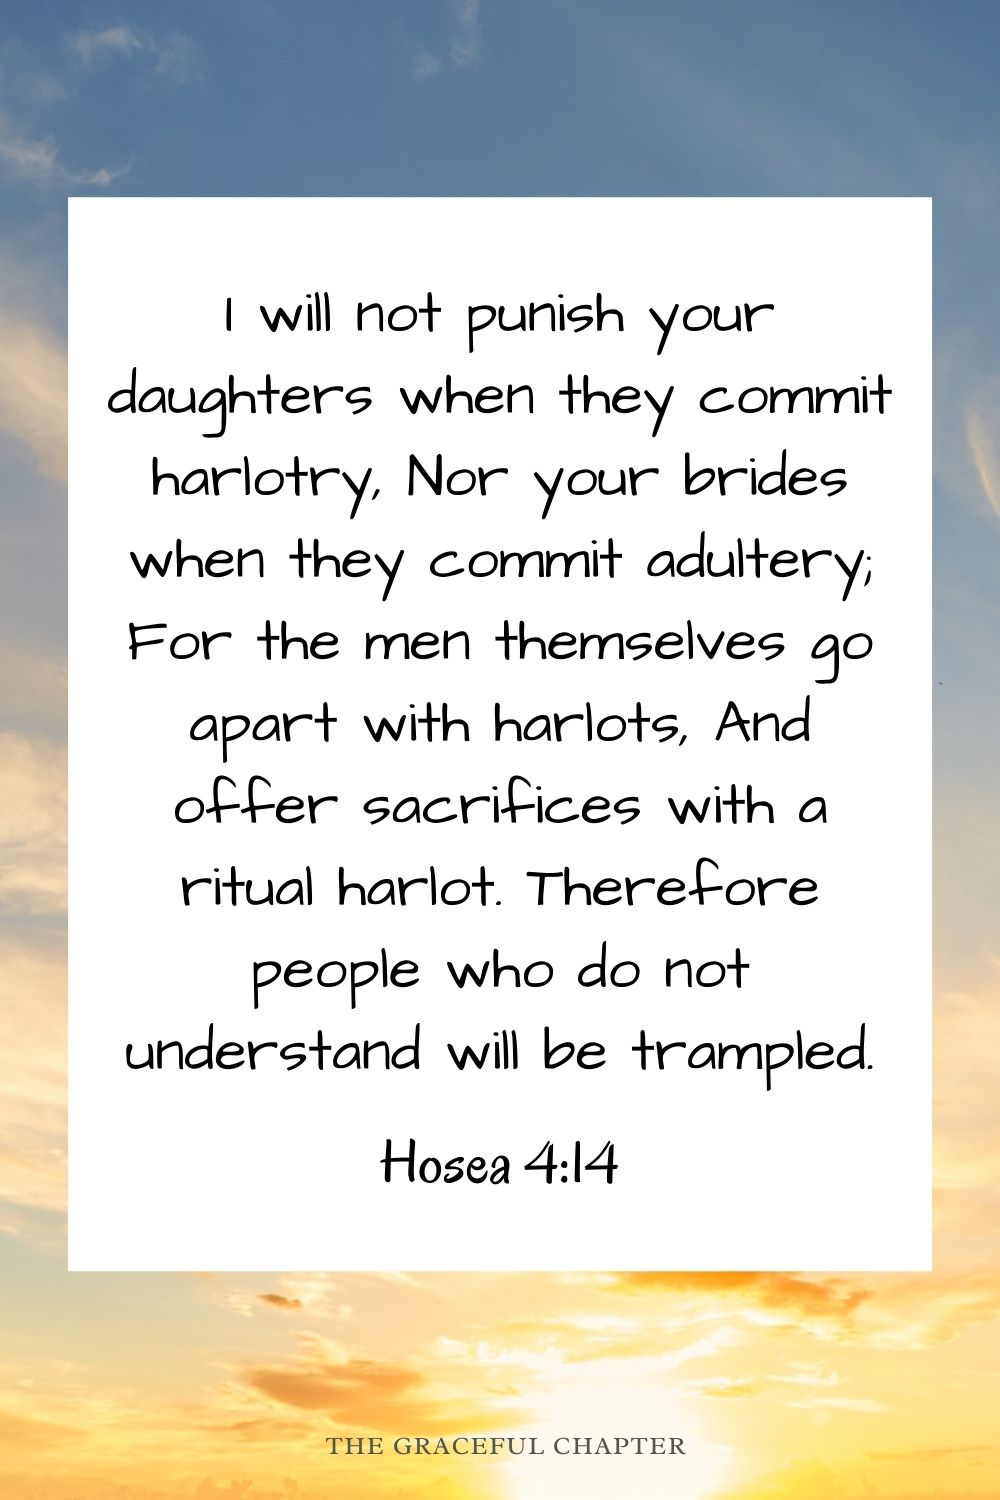  I will not punish your daughters when they commit harlotry, Nor your brides when they commit adultery; For the men themselves go apart with harlots, And offer sacrifices with a ritual harlot. Therefore people who do not understand will be trampled. Hosea 4:14